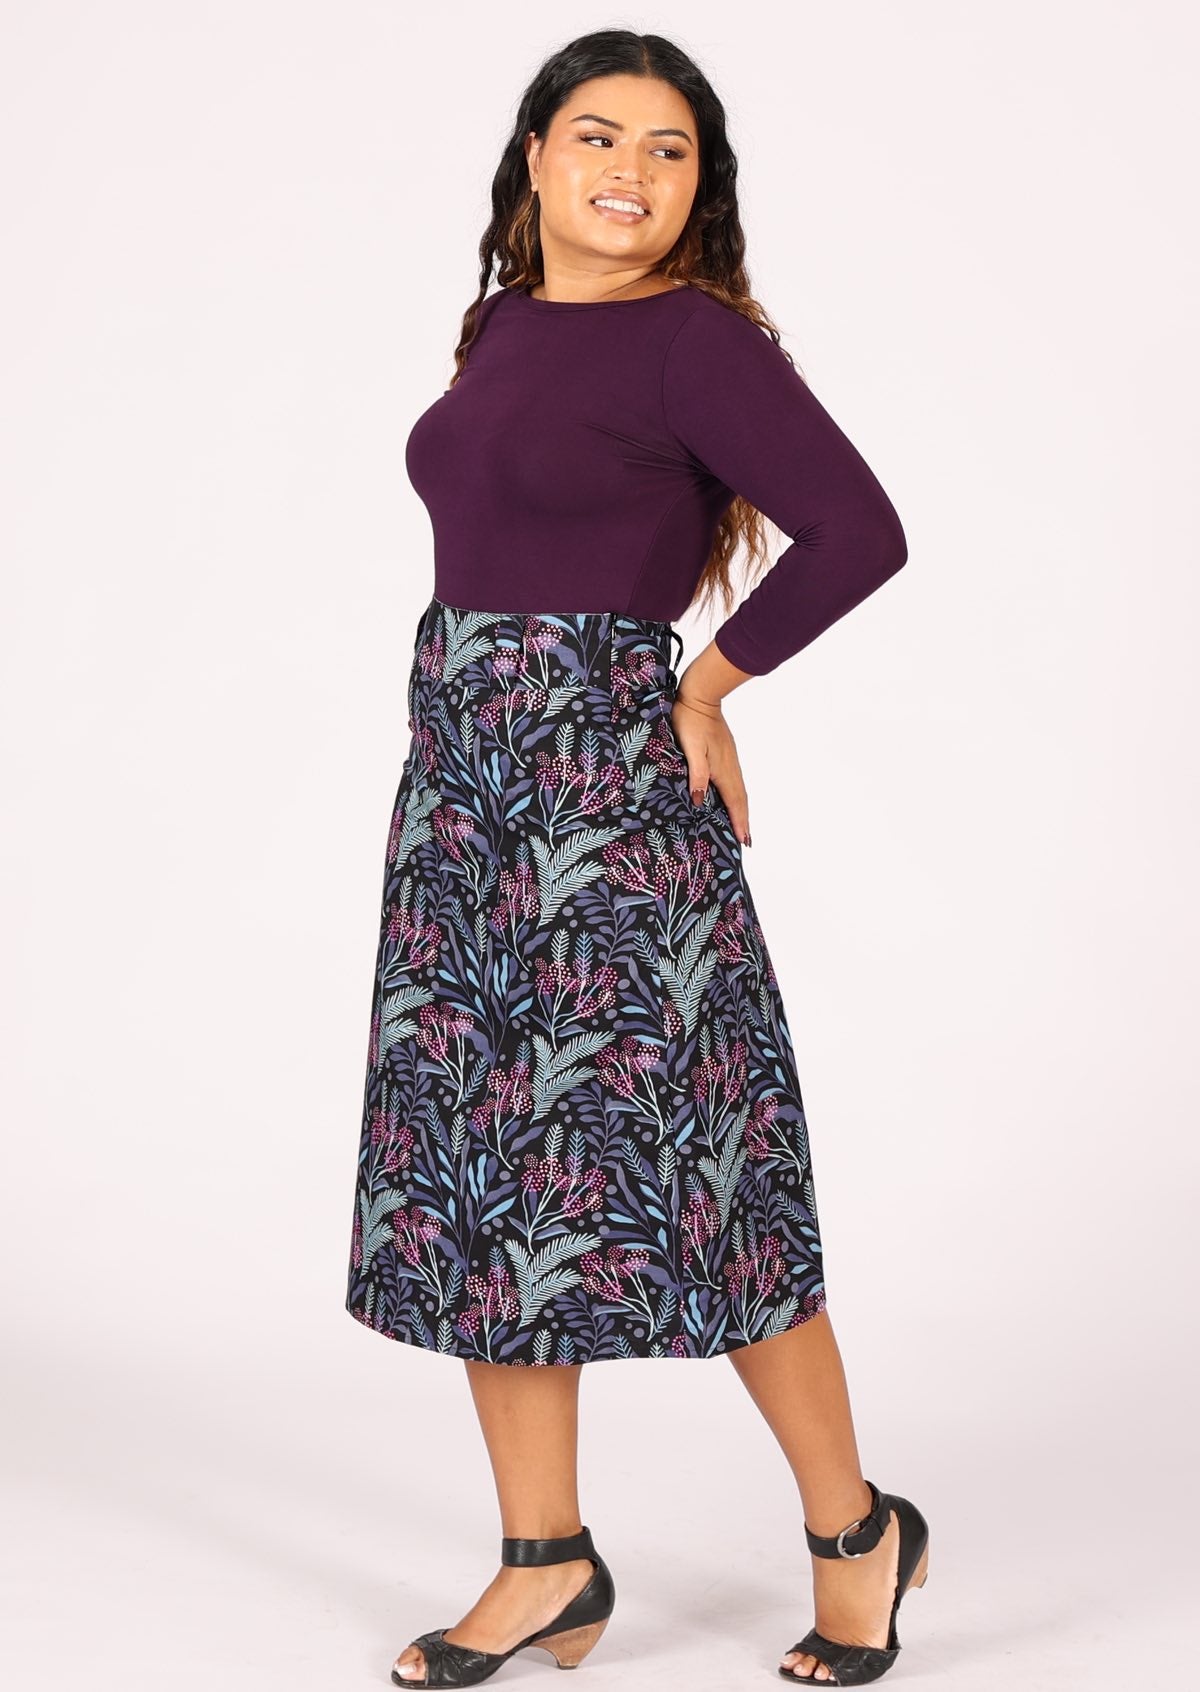 100% cotton shin length A-line skirt with belt loops and back pockets